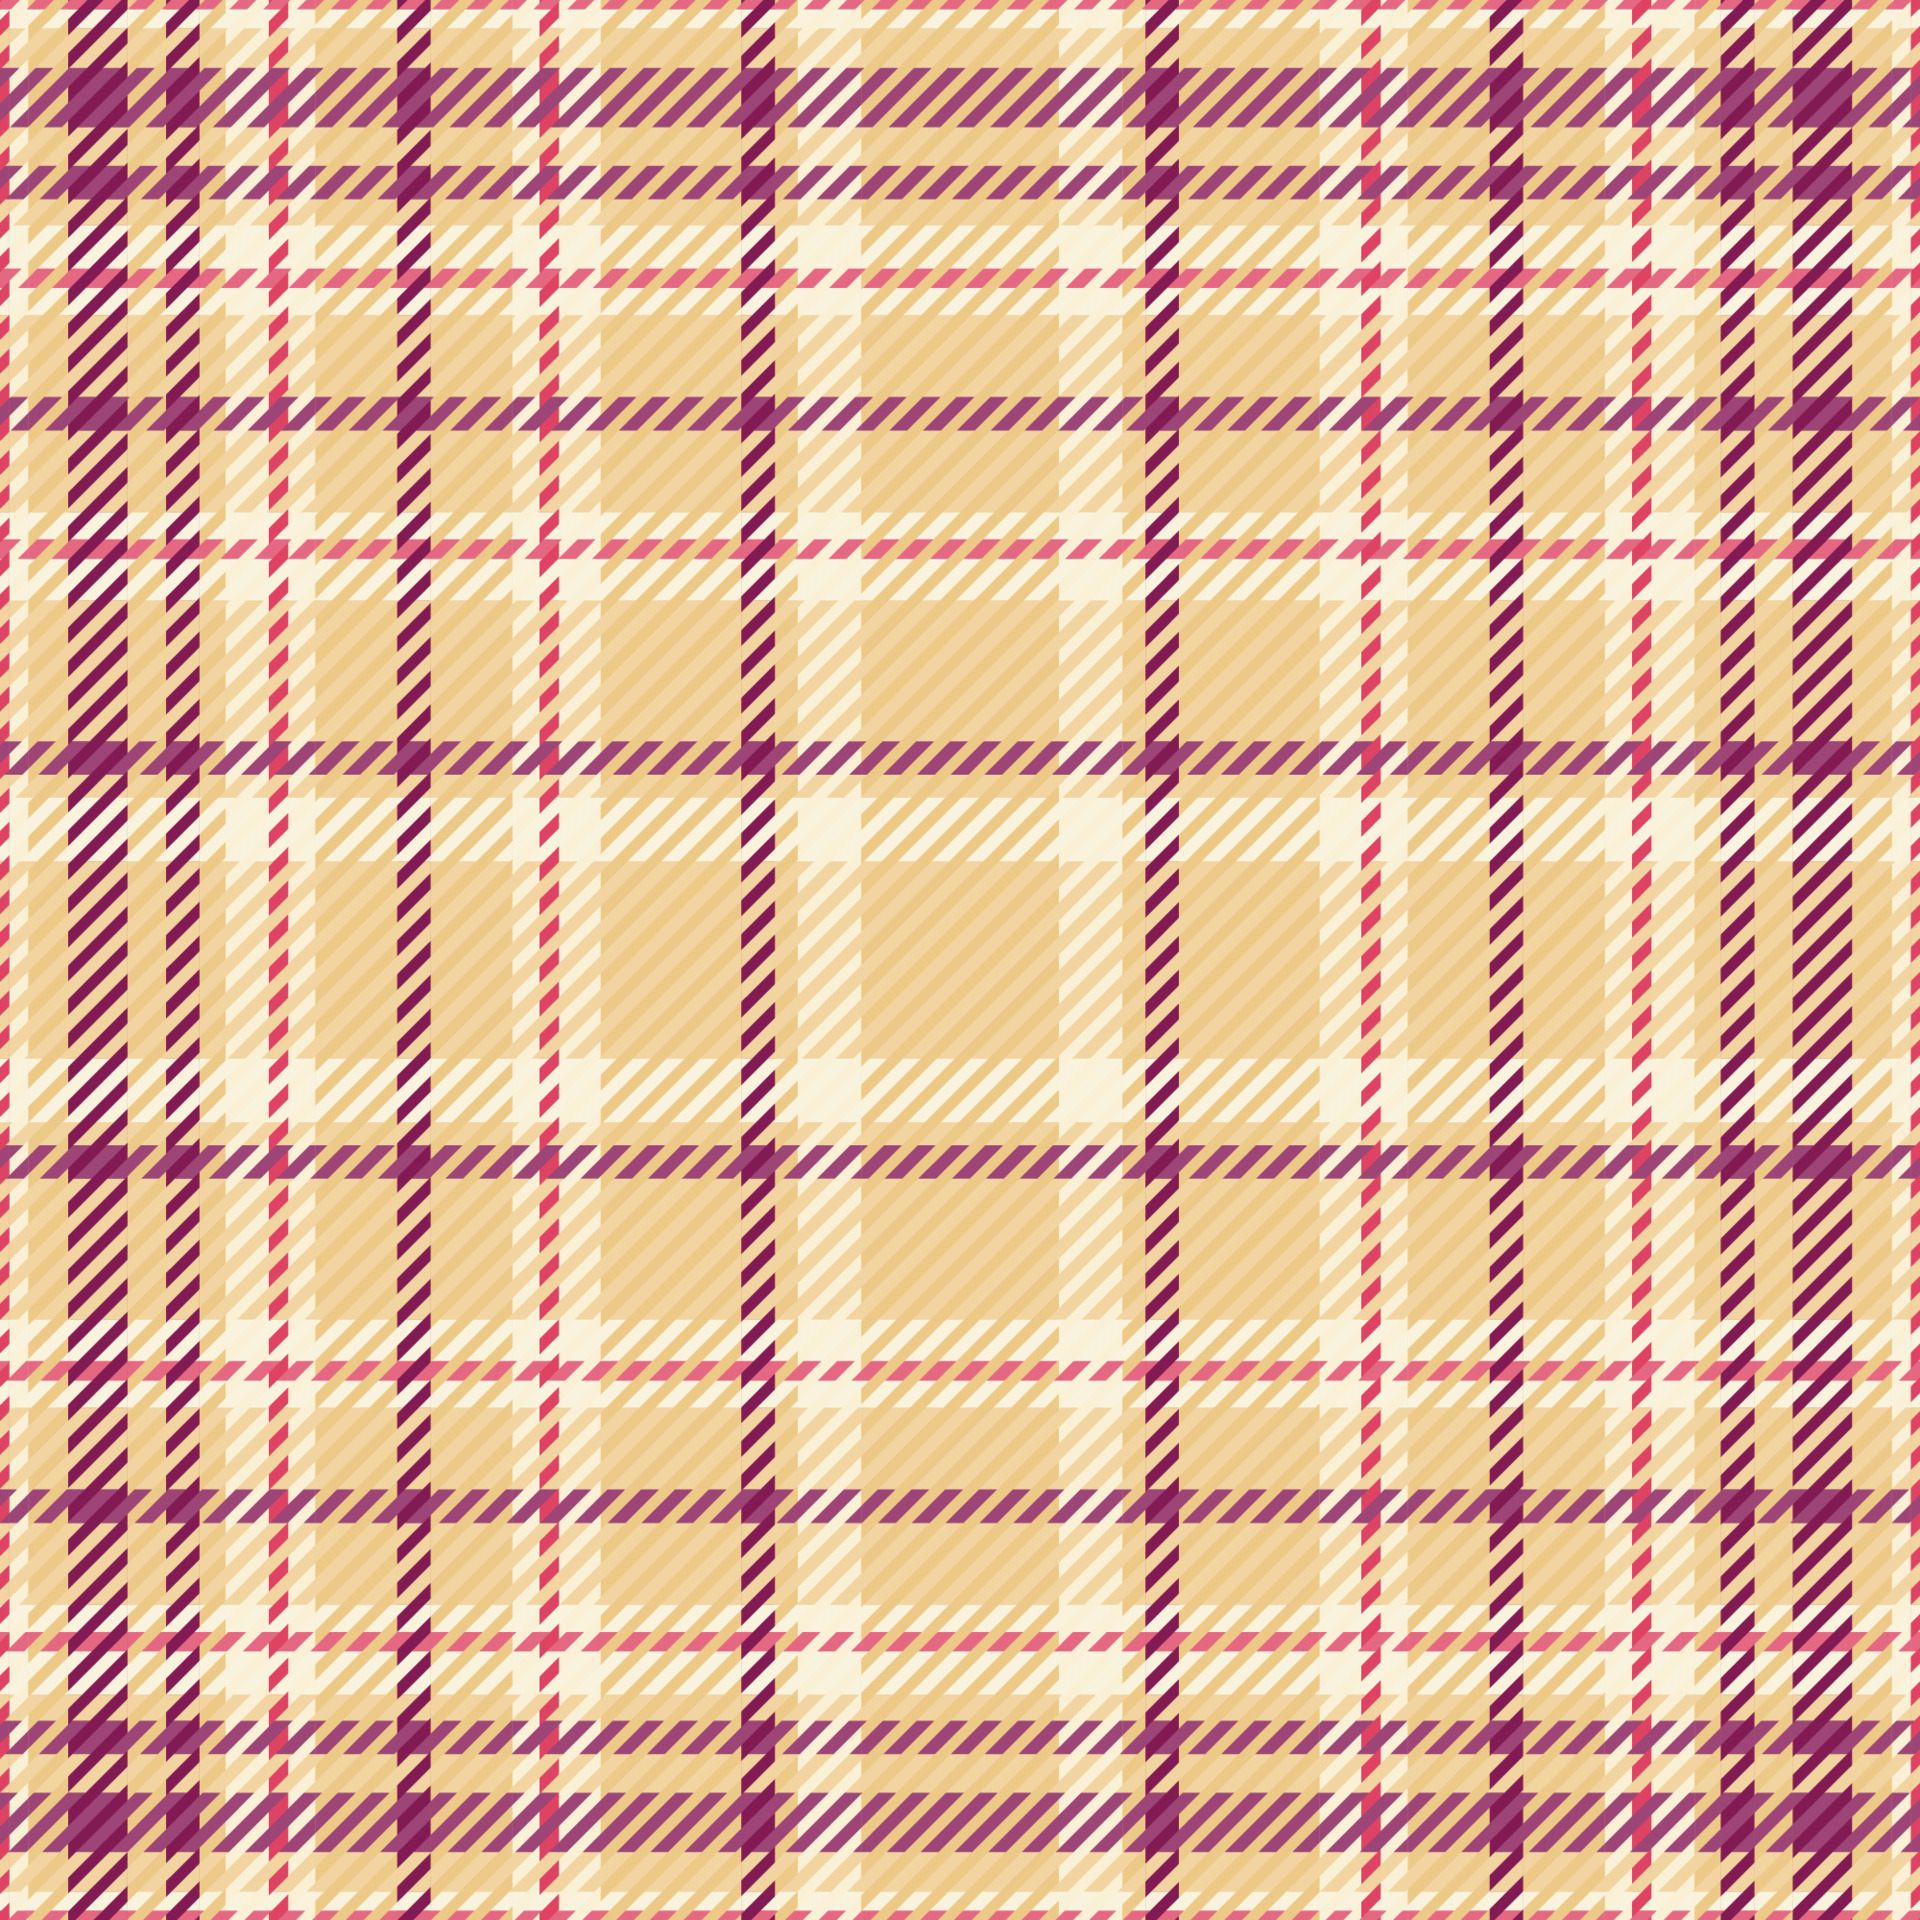 Tartan plaid pattern with texture and warm color. Vector illustration ...